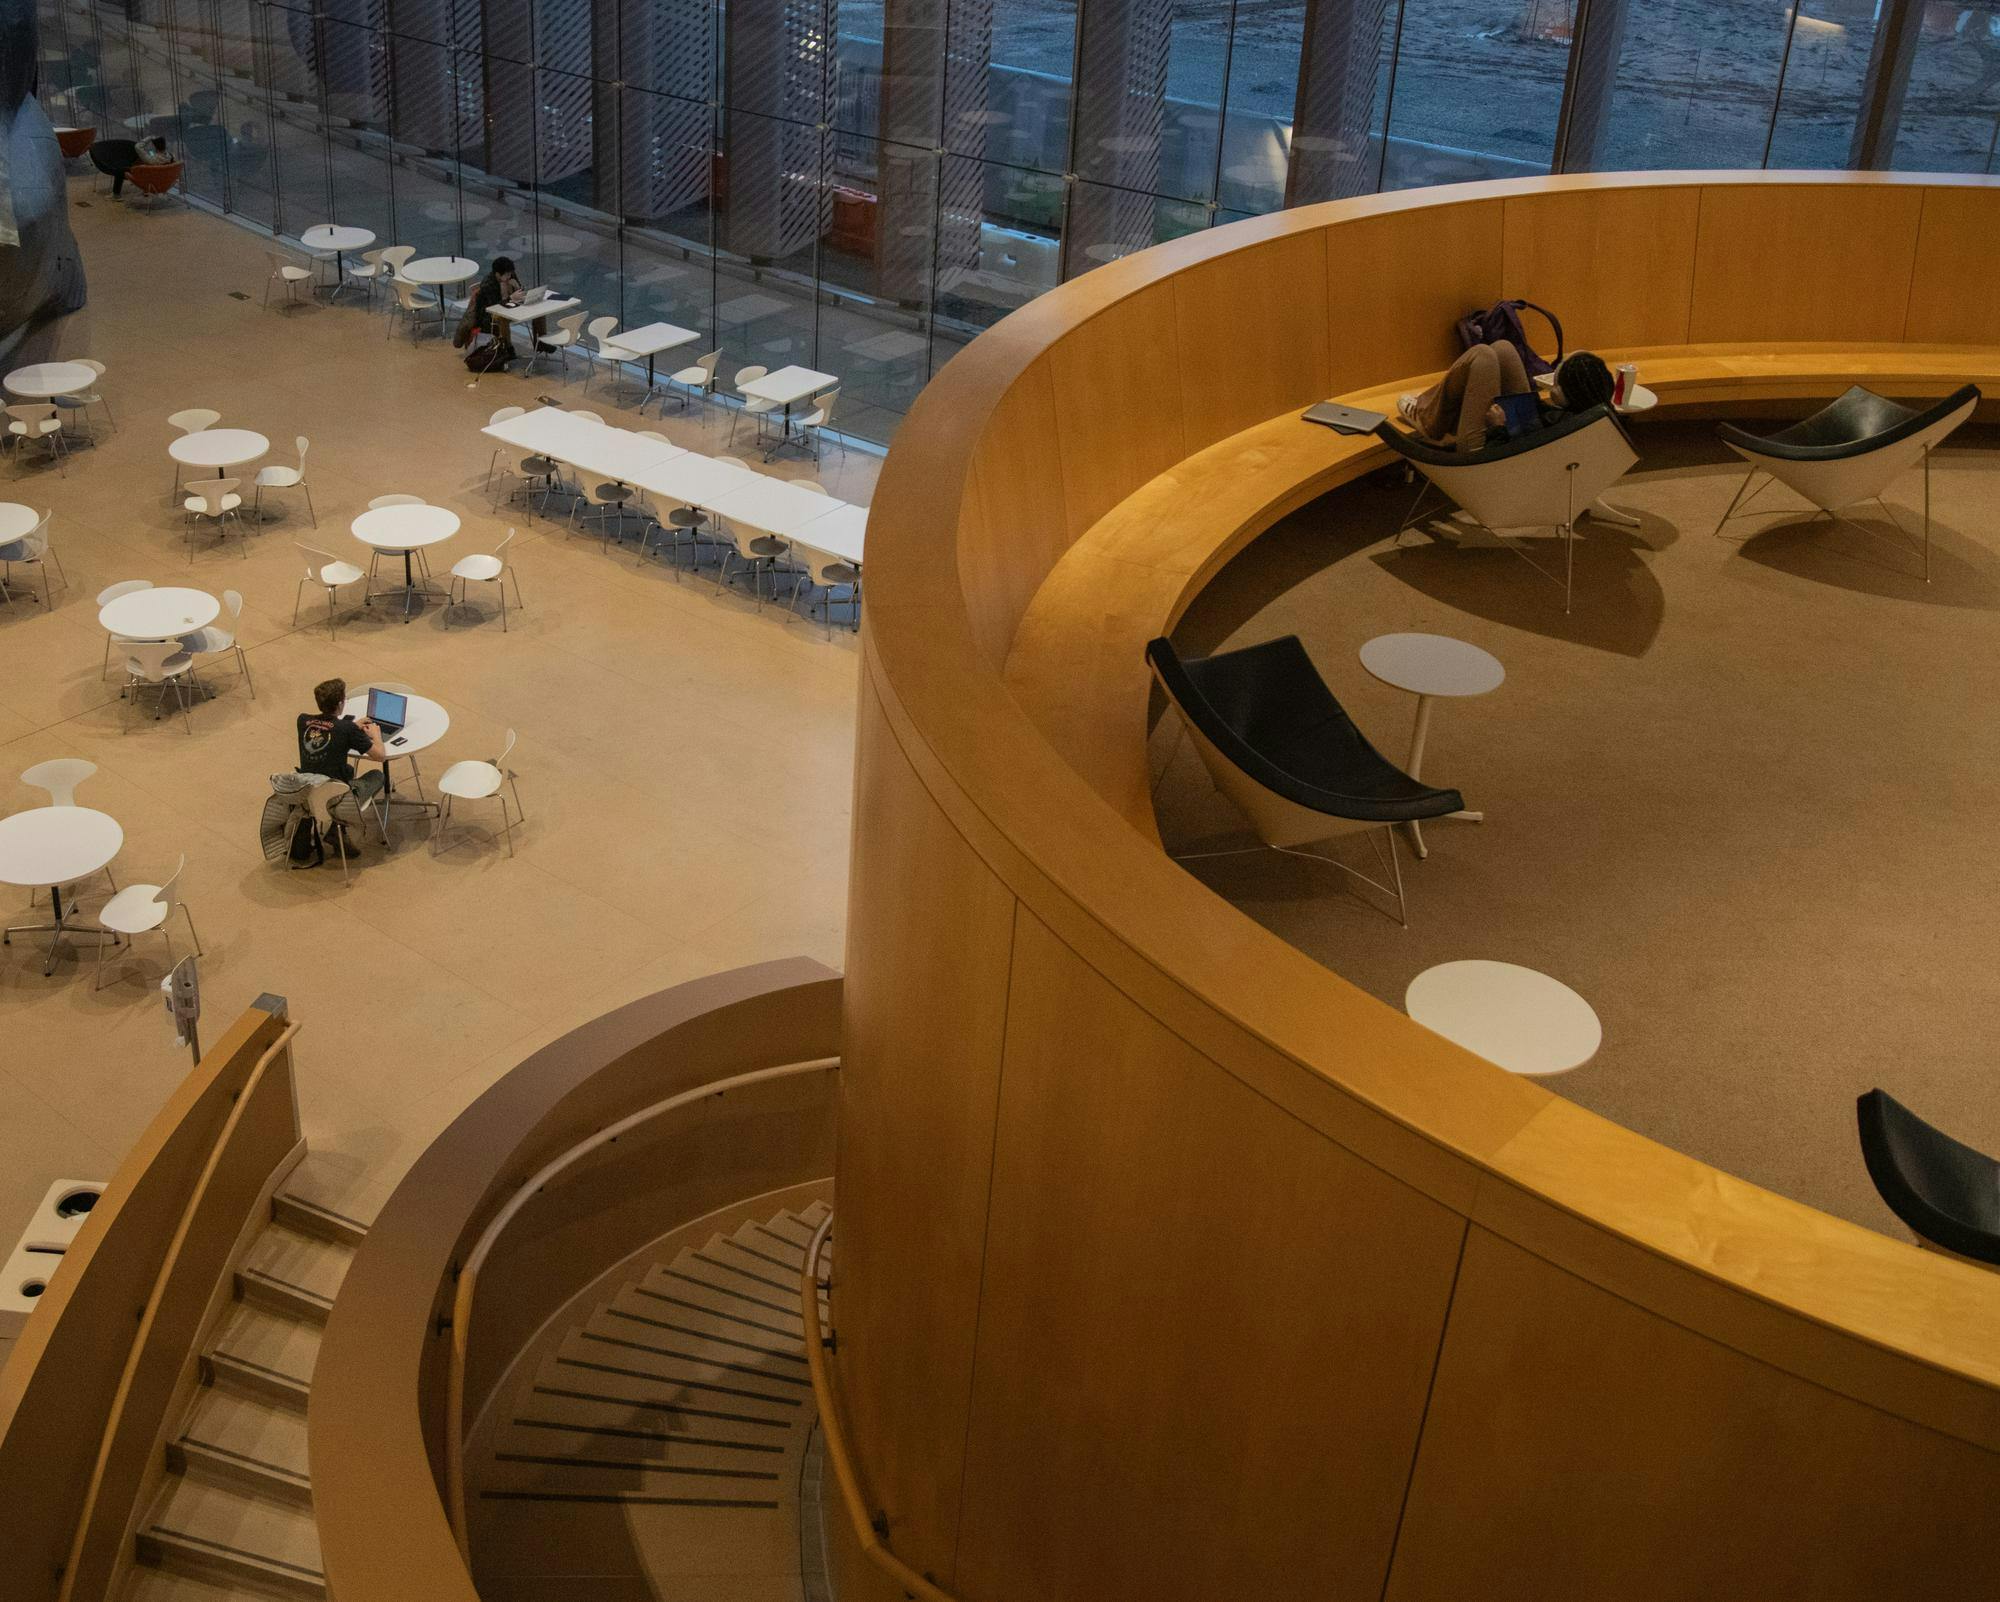 Student studying in circular space; students studying on level directly below in an interior cafe. 